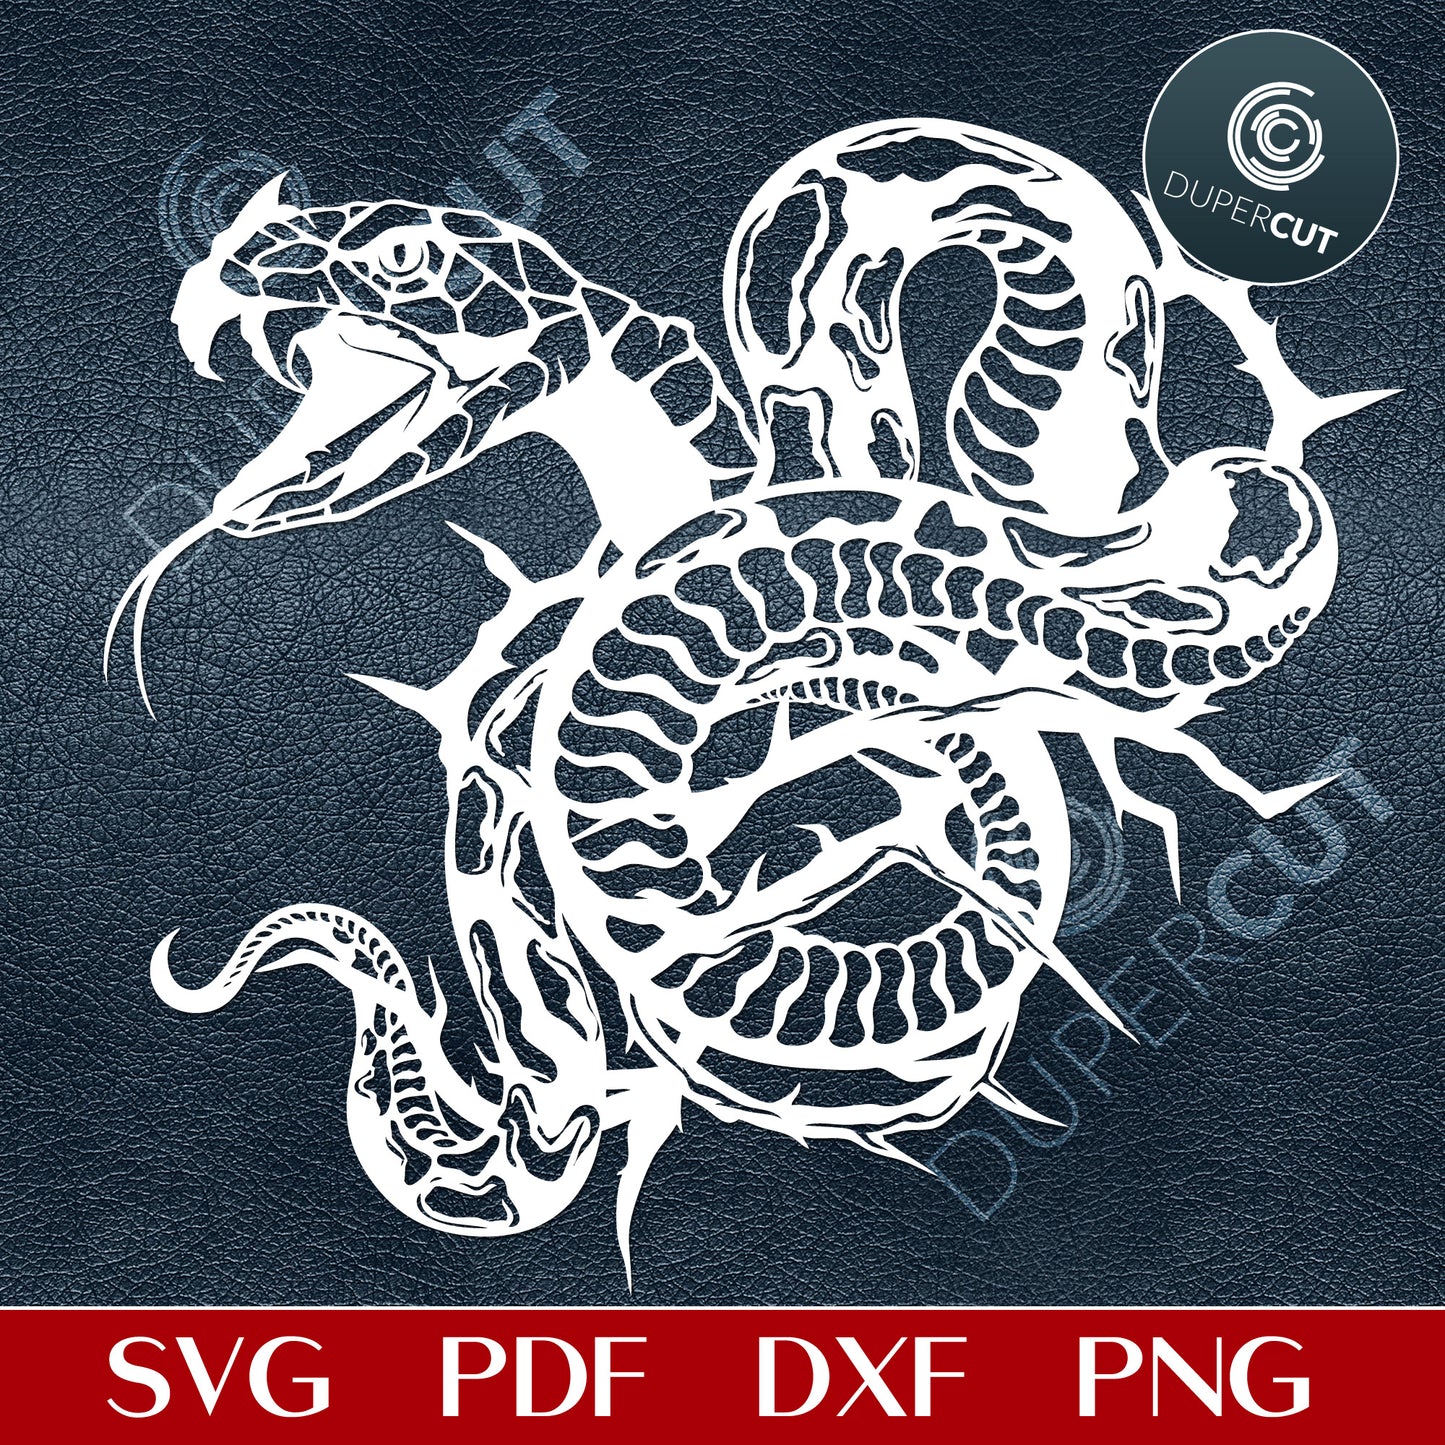 Gothic snake anaconda. Line art tattoo. Papercutting template for commercial use. SVG PNG PDF vector files for Silhouette Cameo, Cricut, Glowforge, DXF for CNC, laser cutting, print on demand